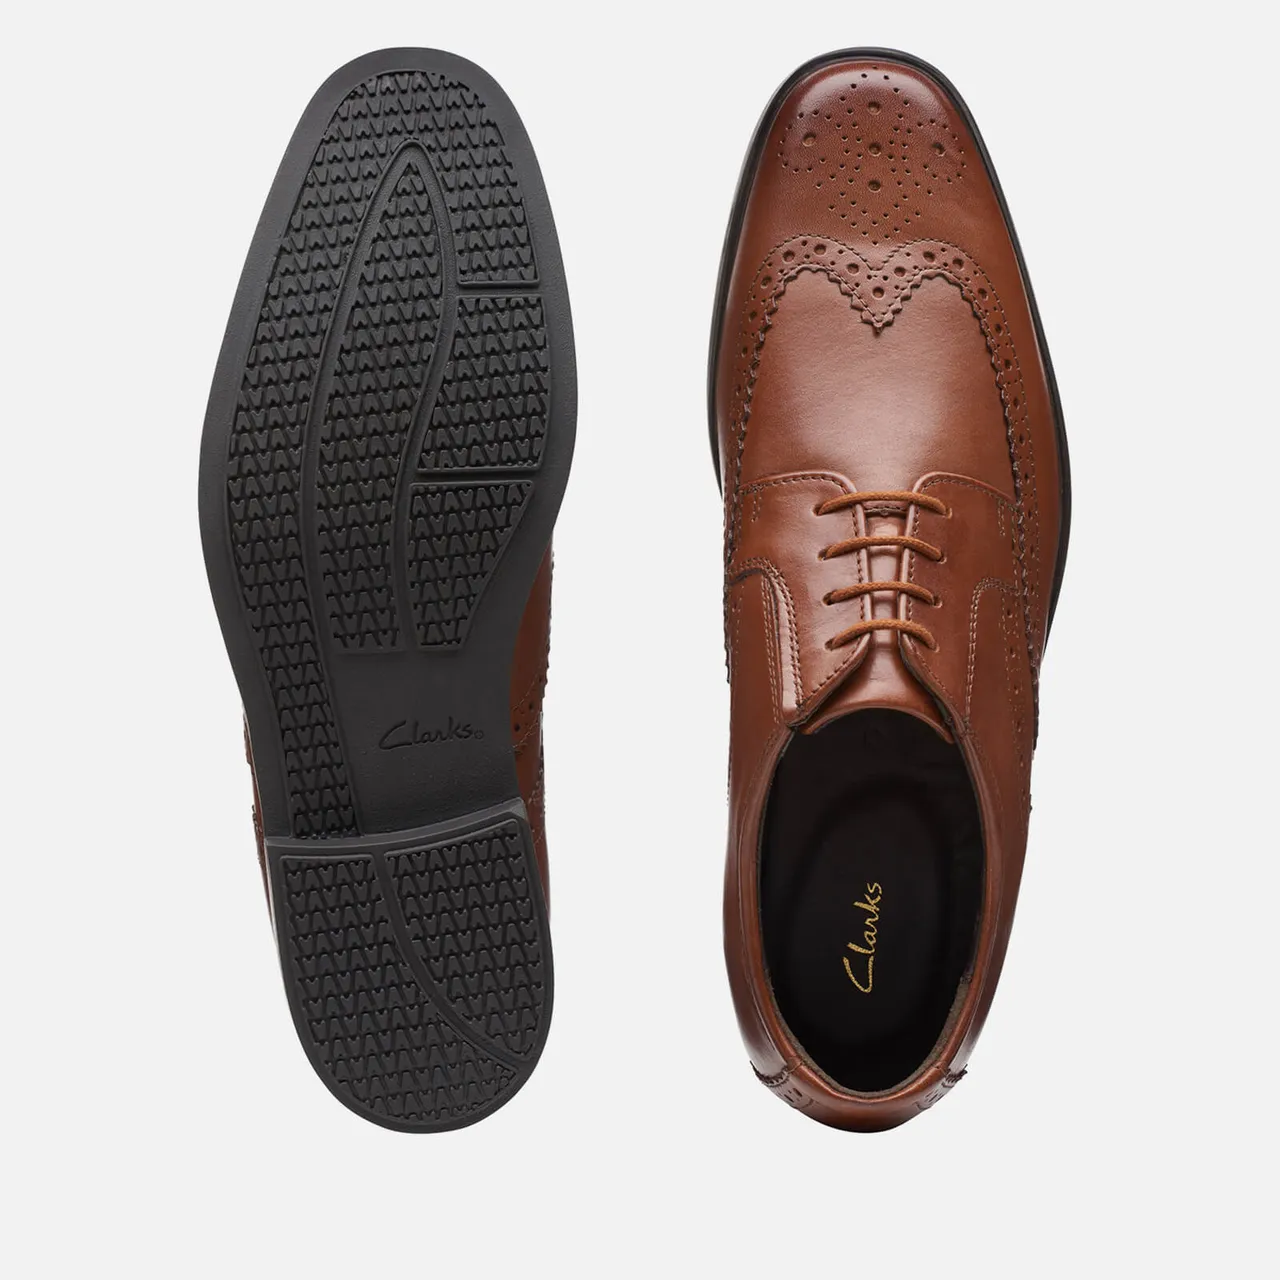 Clarks Howard Wing Leather Derby Shoes - UK